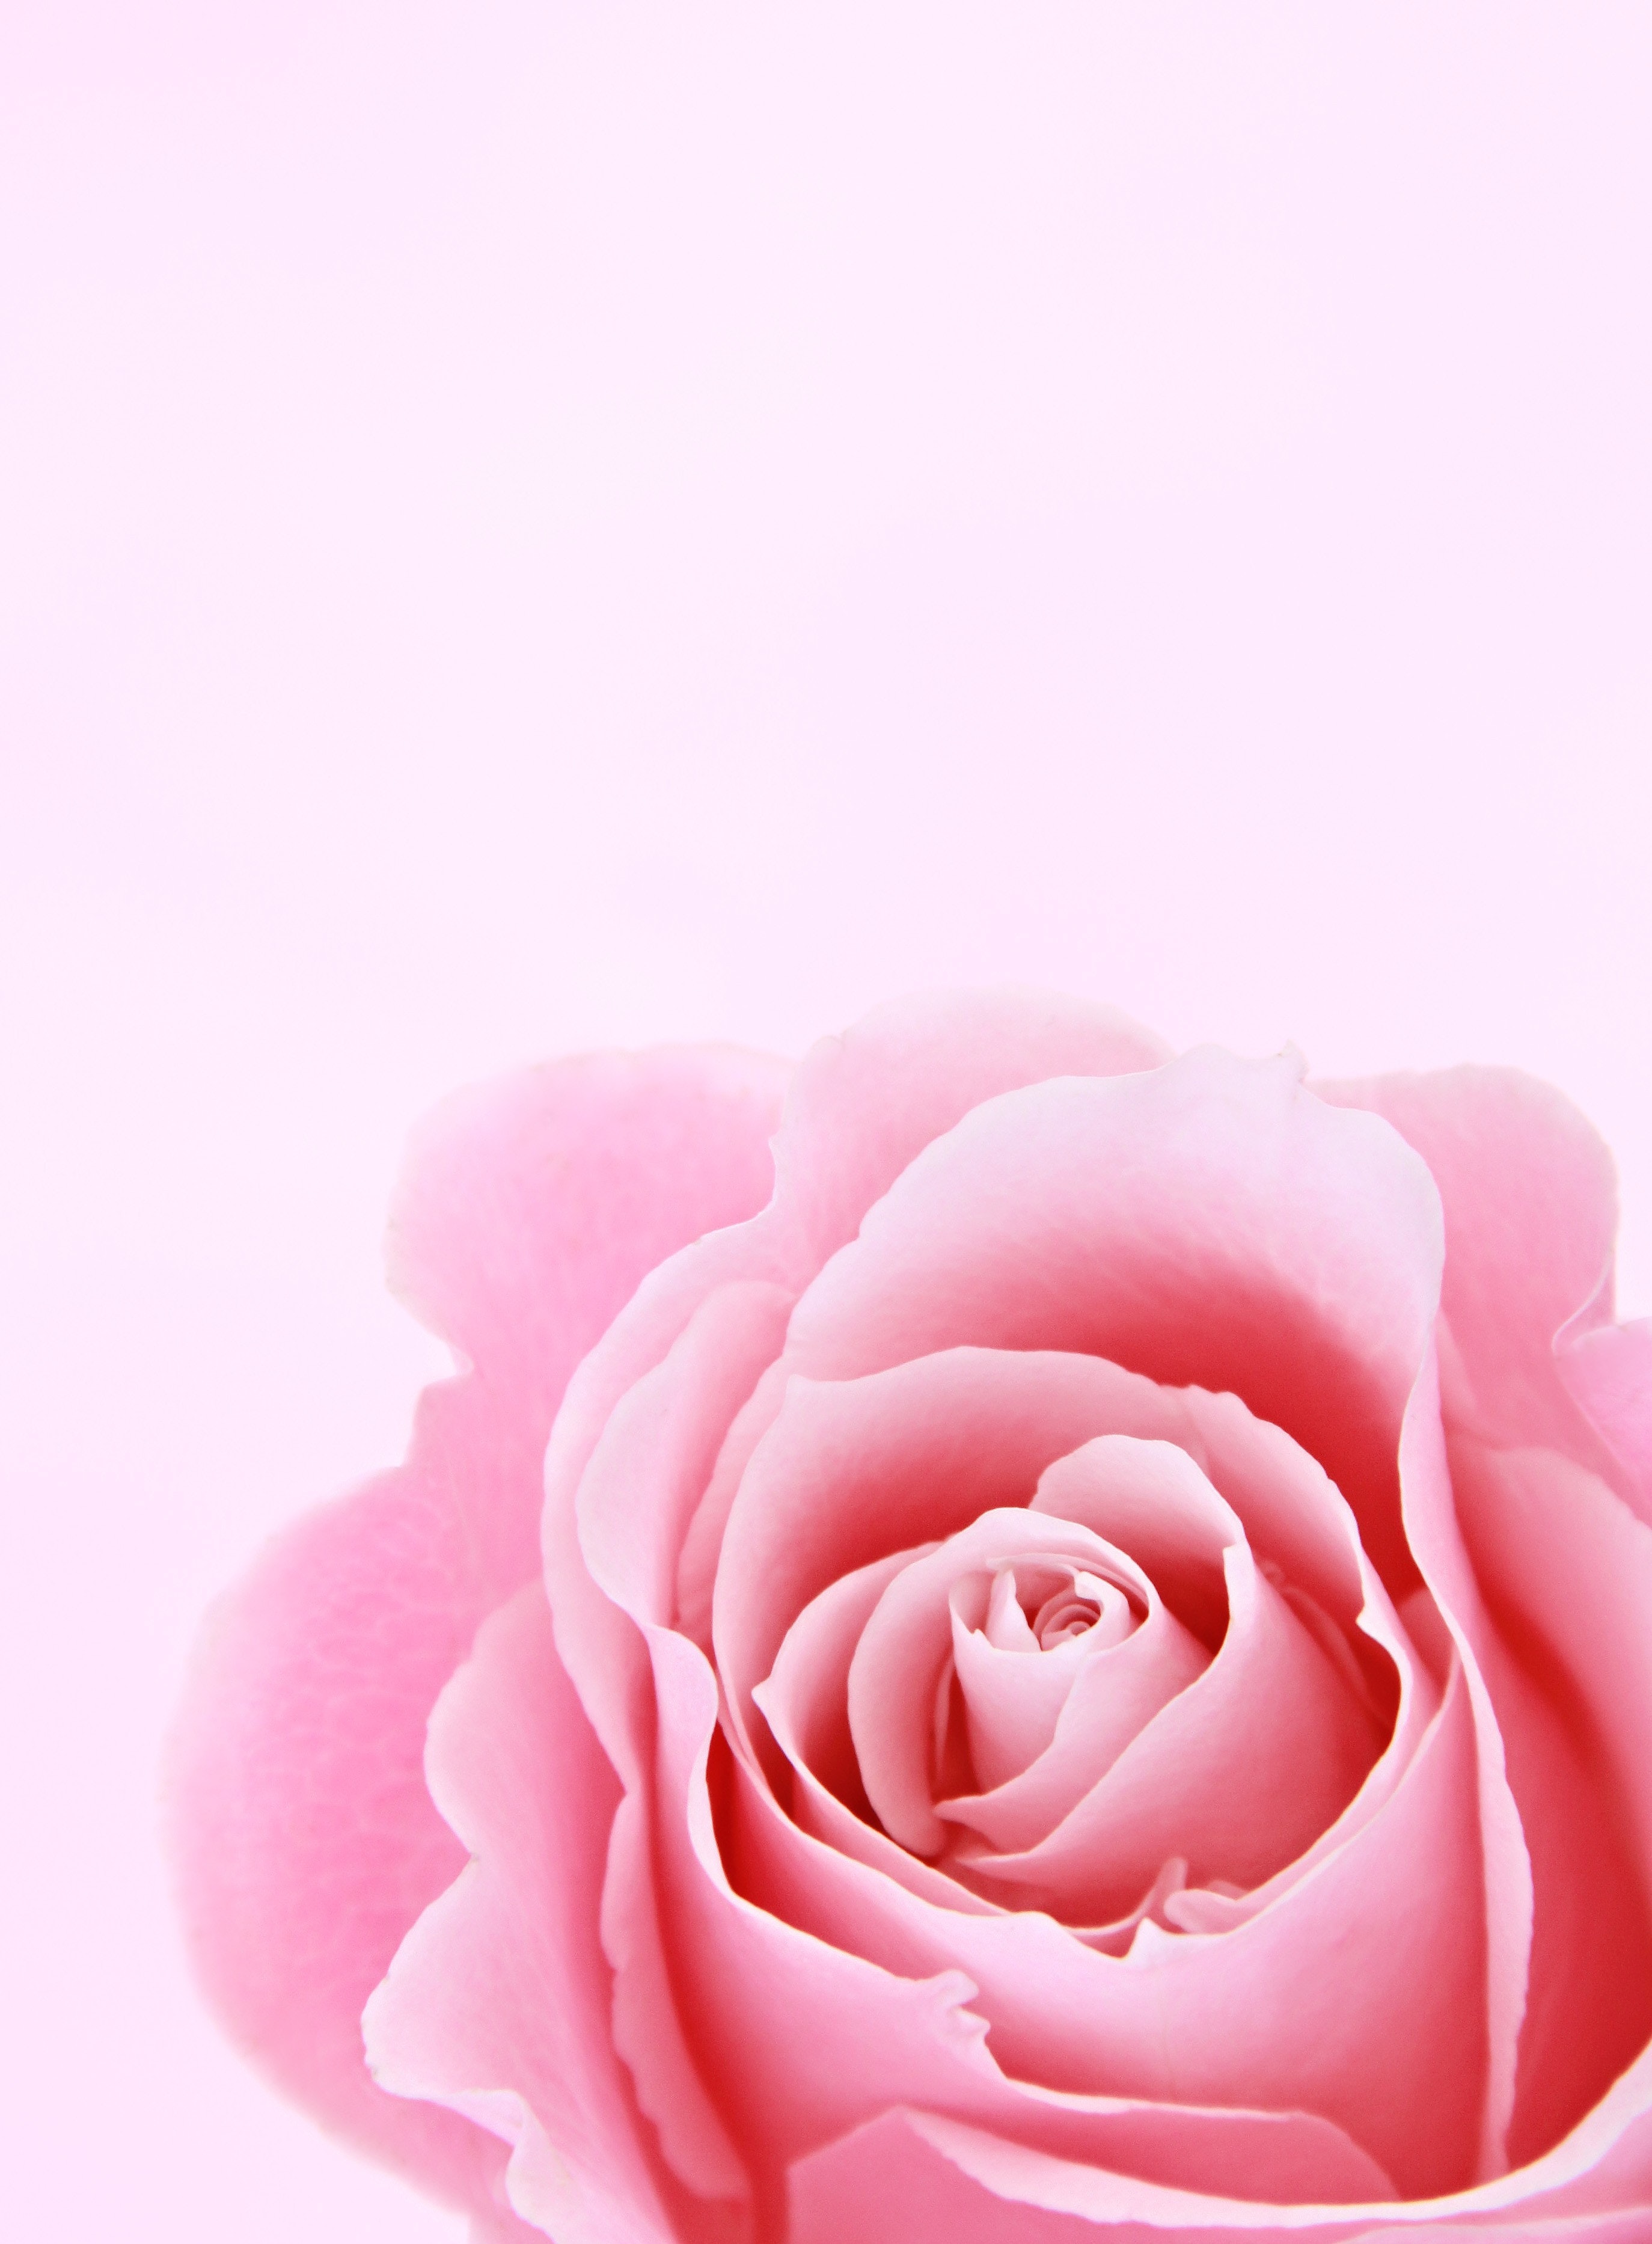 Download Free 100 + rose pink background Wallpapers